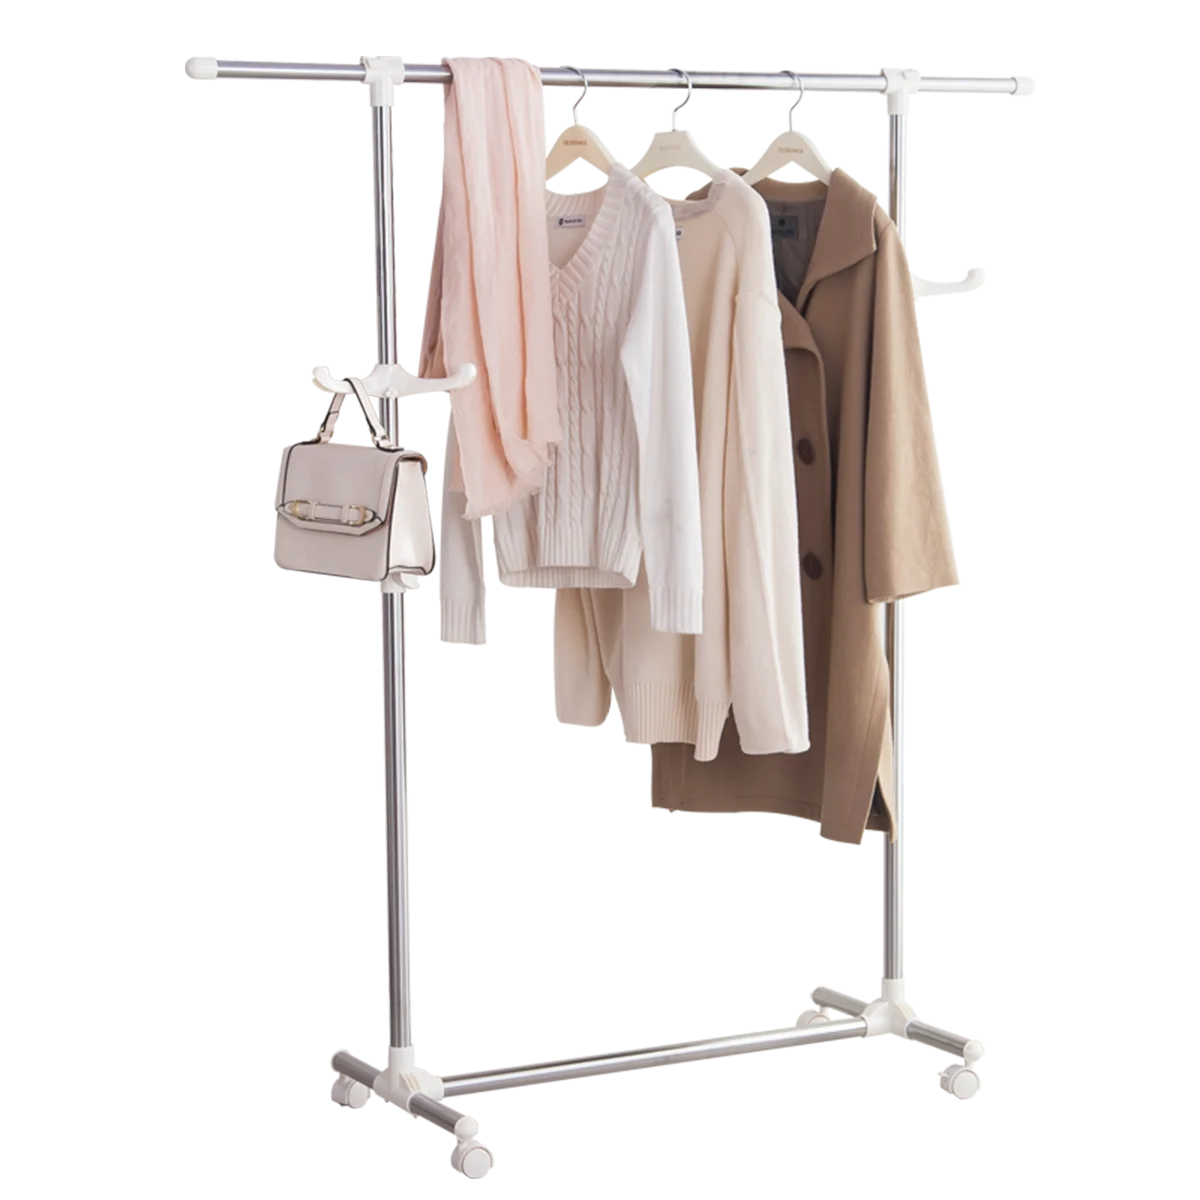 

BAOYOUNI Stainless Ateel Adjustable Telescopic Single Pole Hangers Balcony Shelves Clothes Dryer Movable Rack Stand With Wheels, Ivory